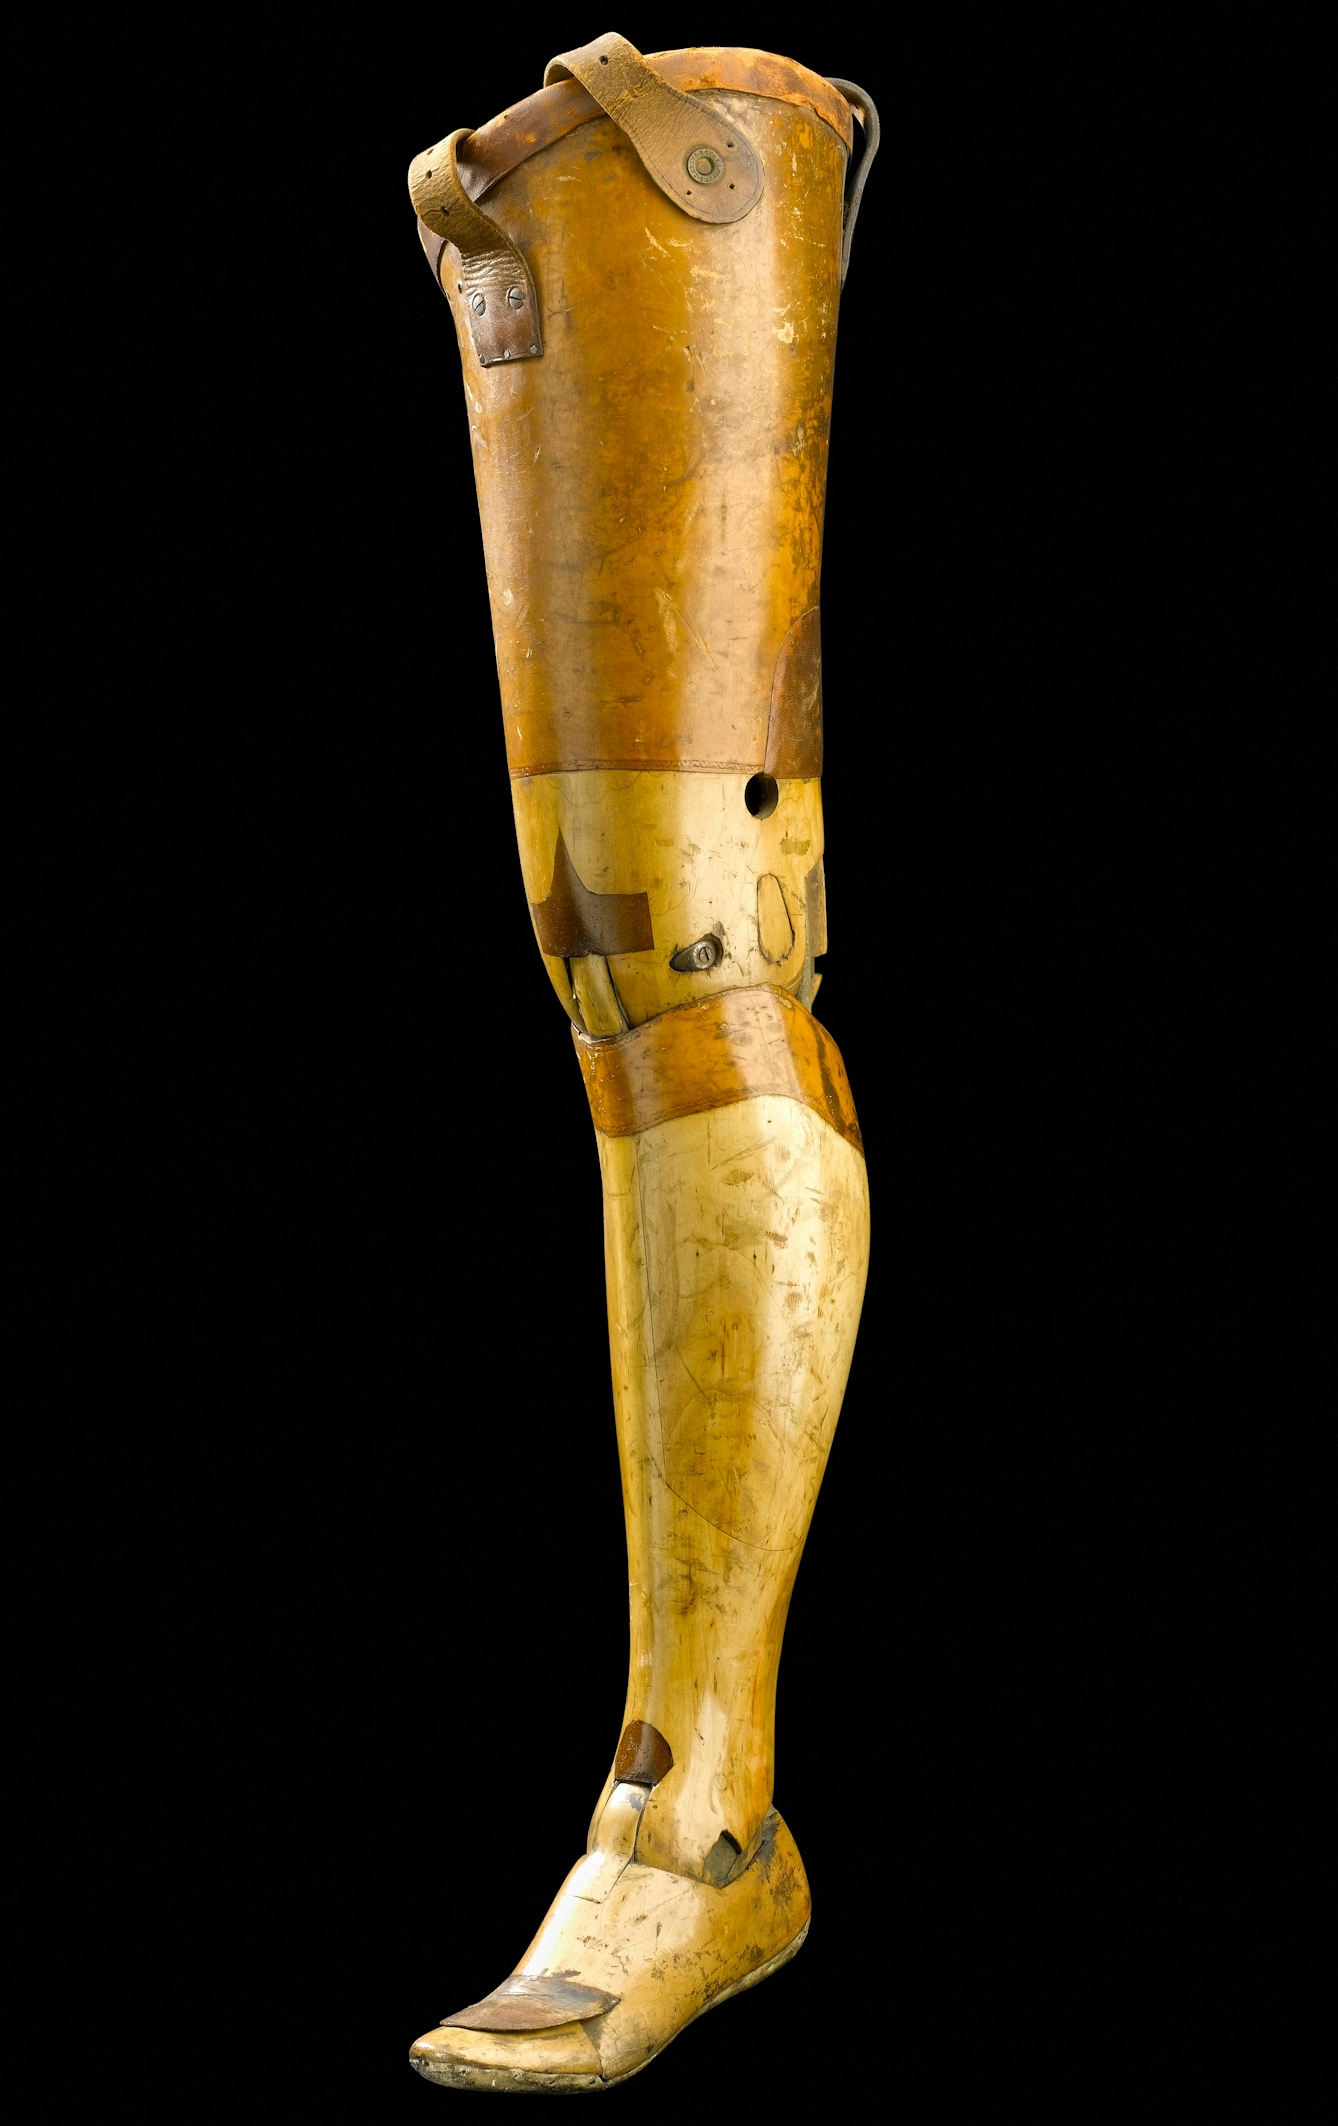 This artificial left leg is made from willow and leather. Earlier versions were known as ‘Clapper’ legs after the sound the leg made when fully extended.